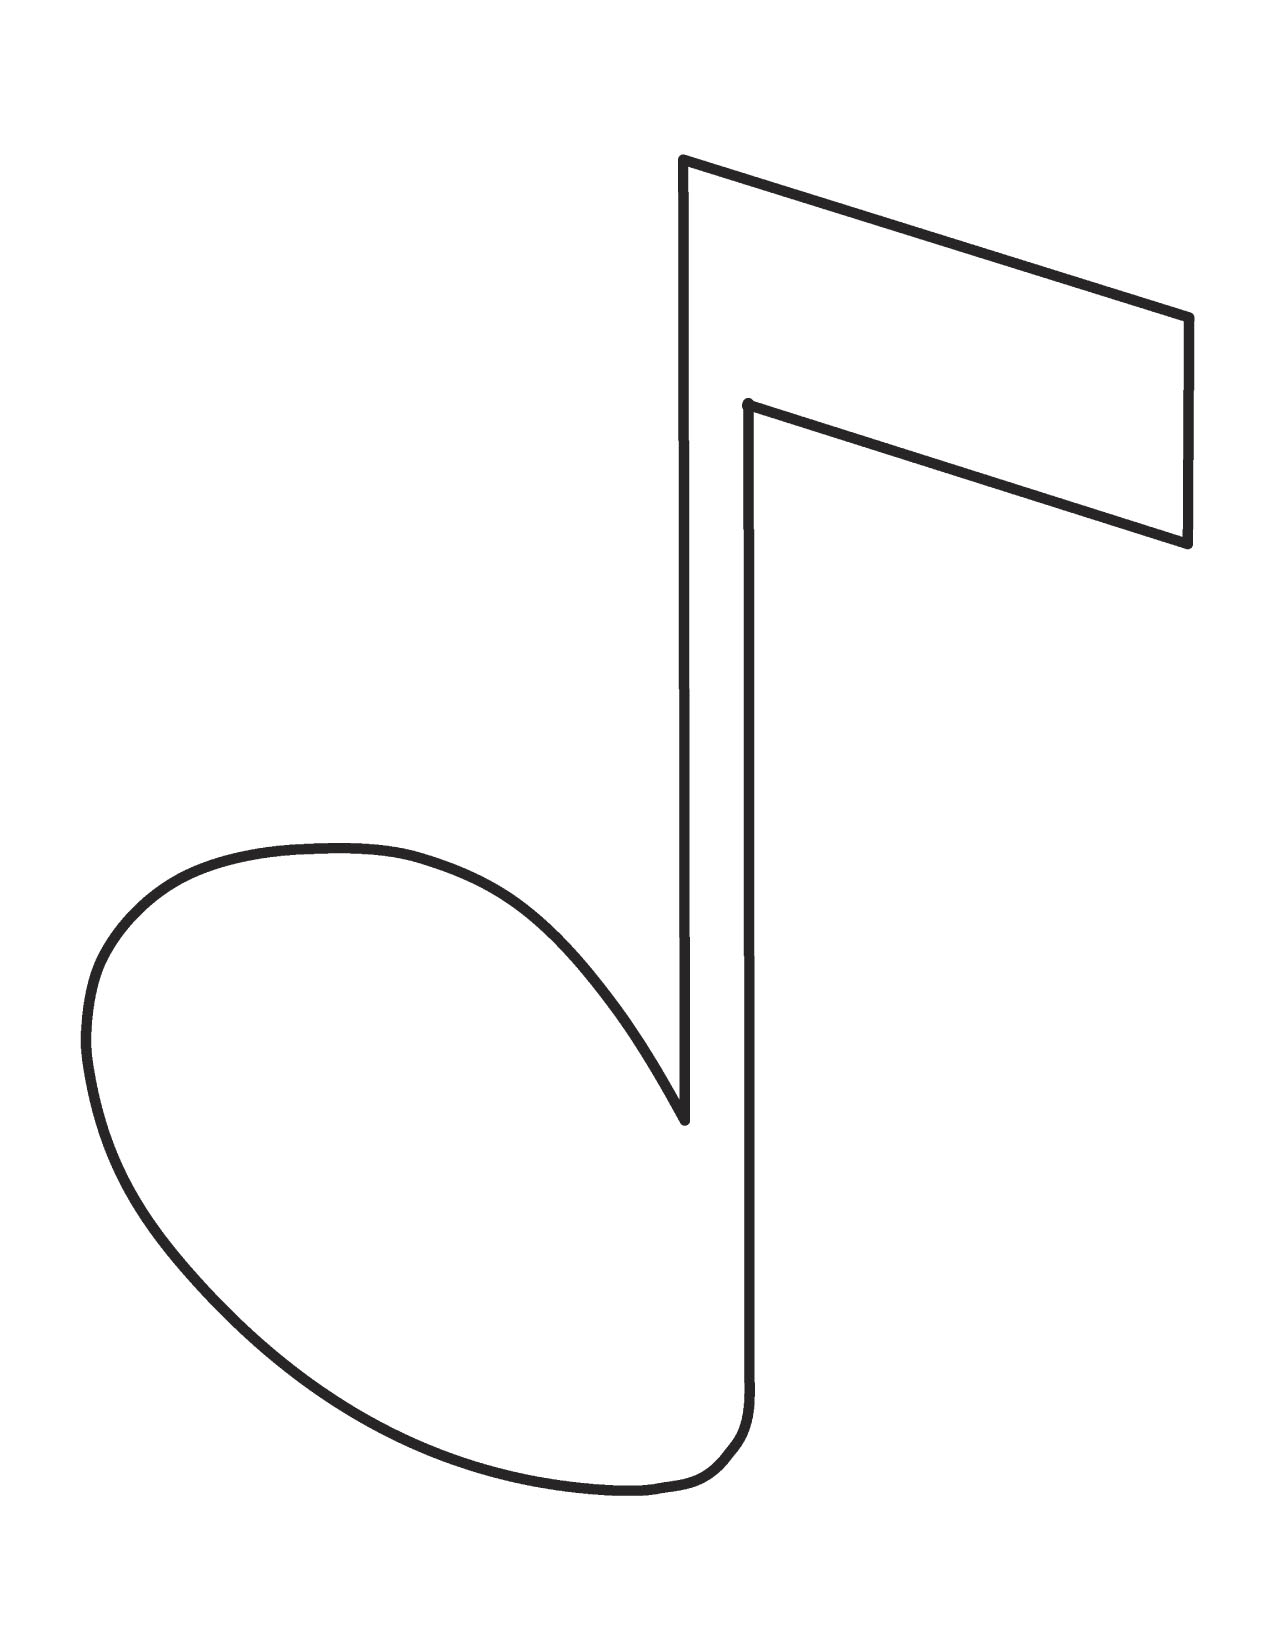 Music Notes Coloring Page Free Printable Music Note Coloring Pages For Kids